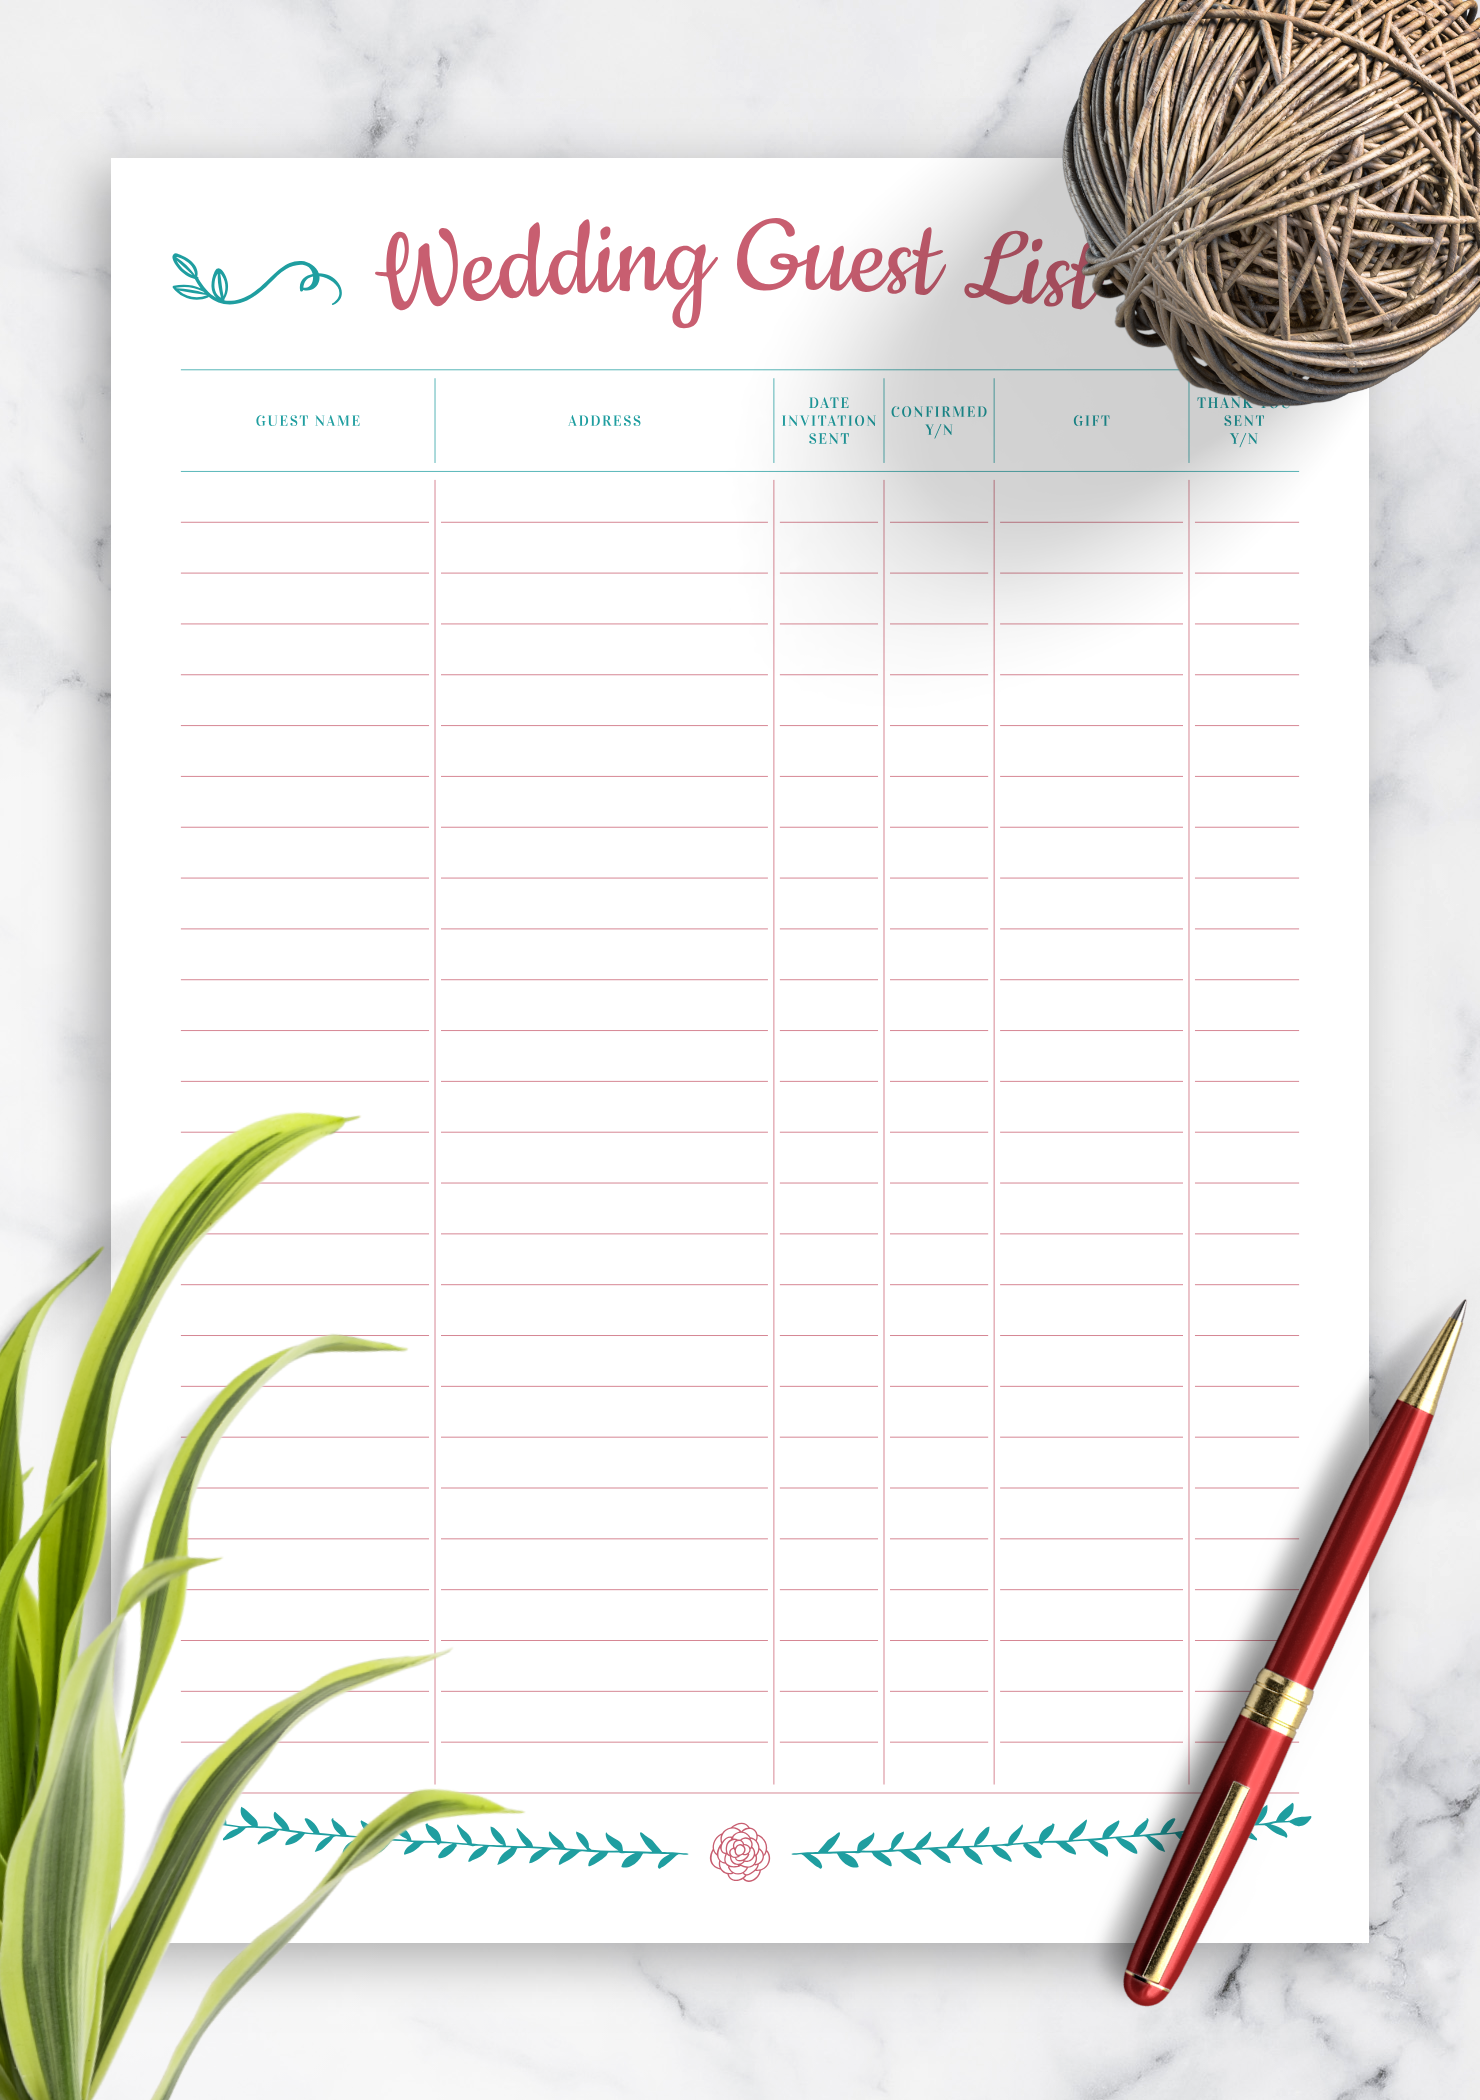 Printable Wedding Guest List with Gift Section